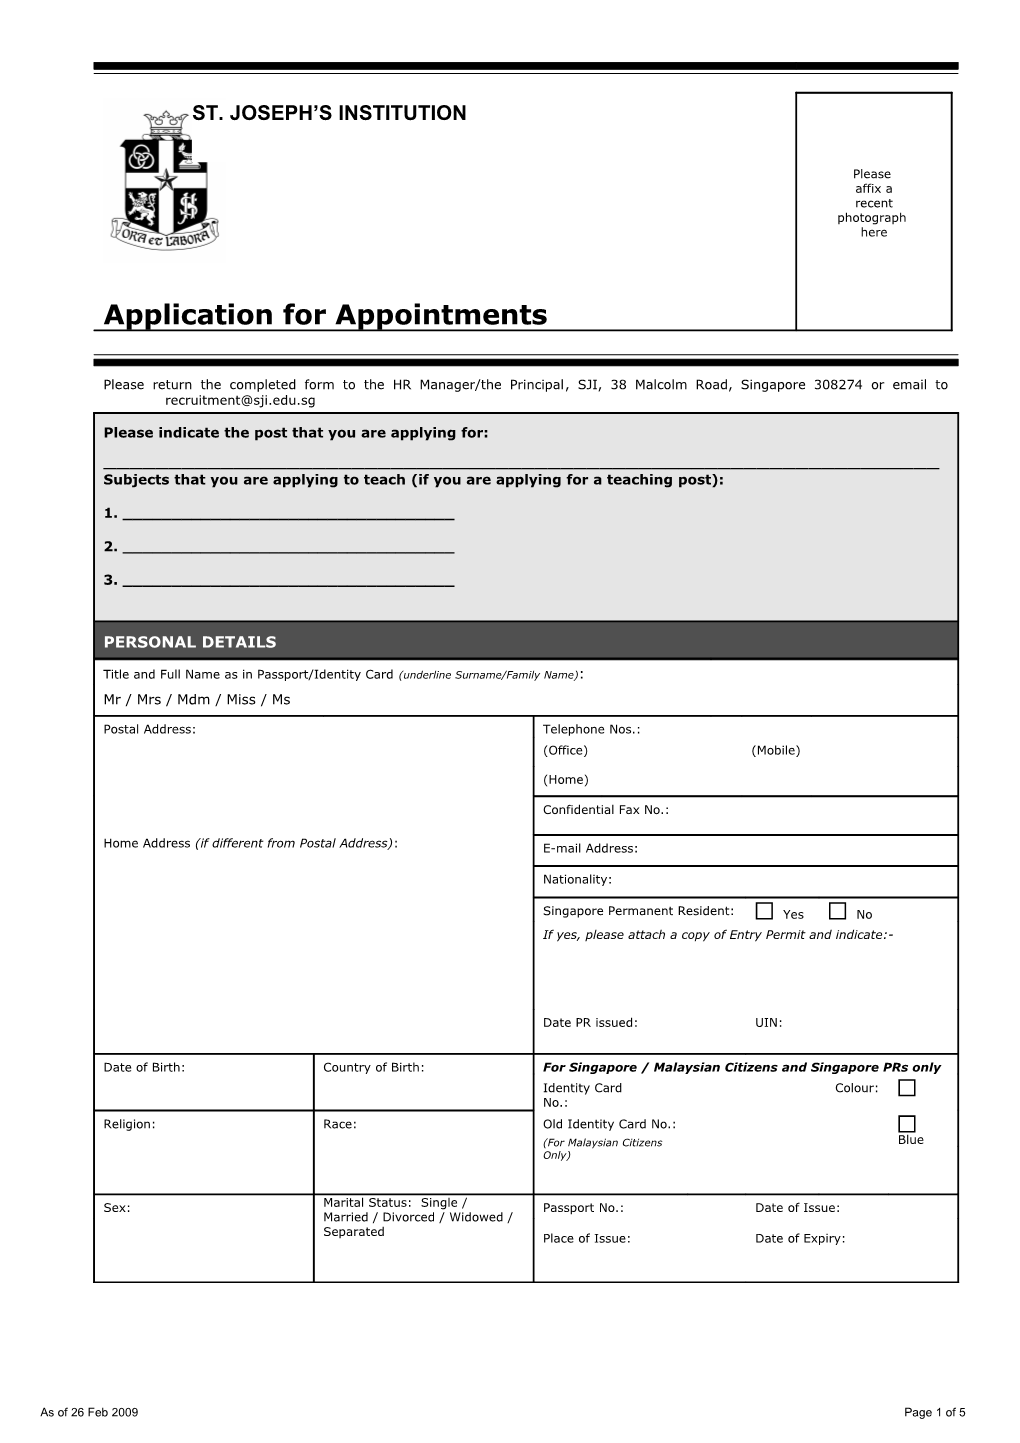 Application Form - Admin & Prof Appointments